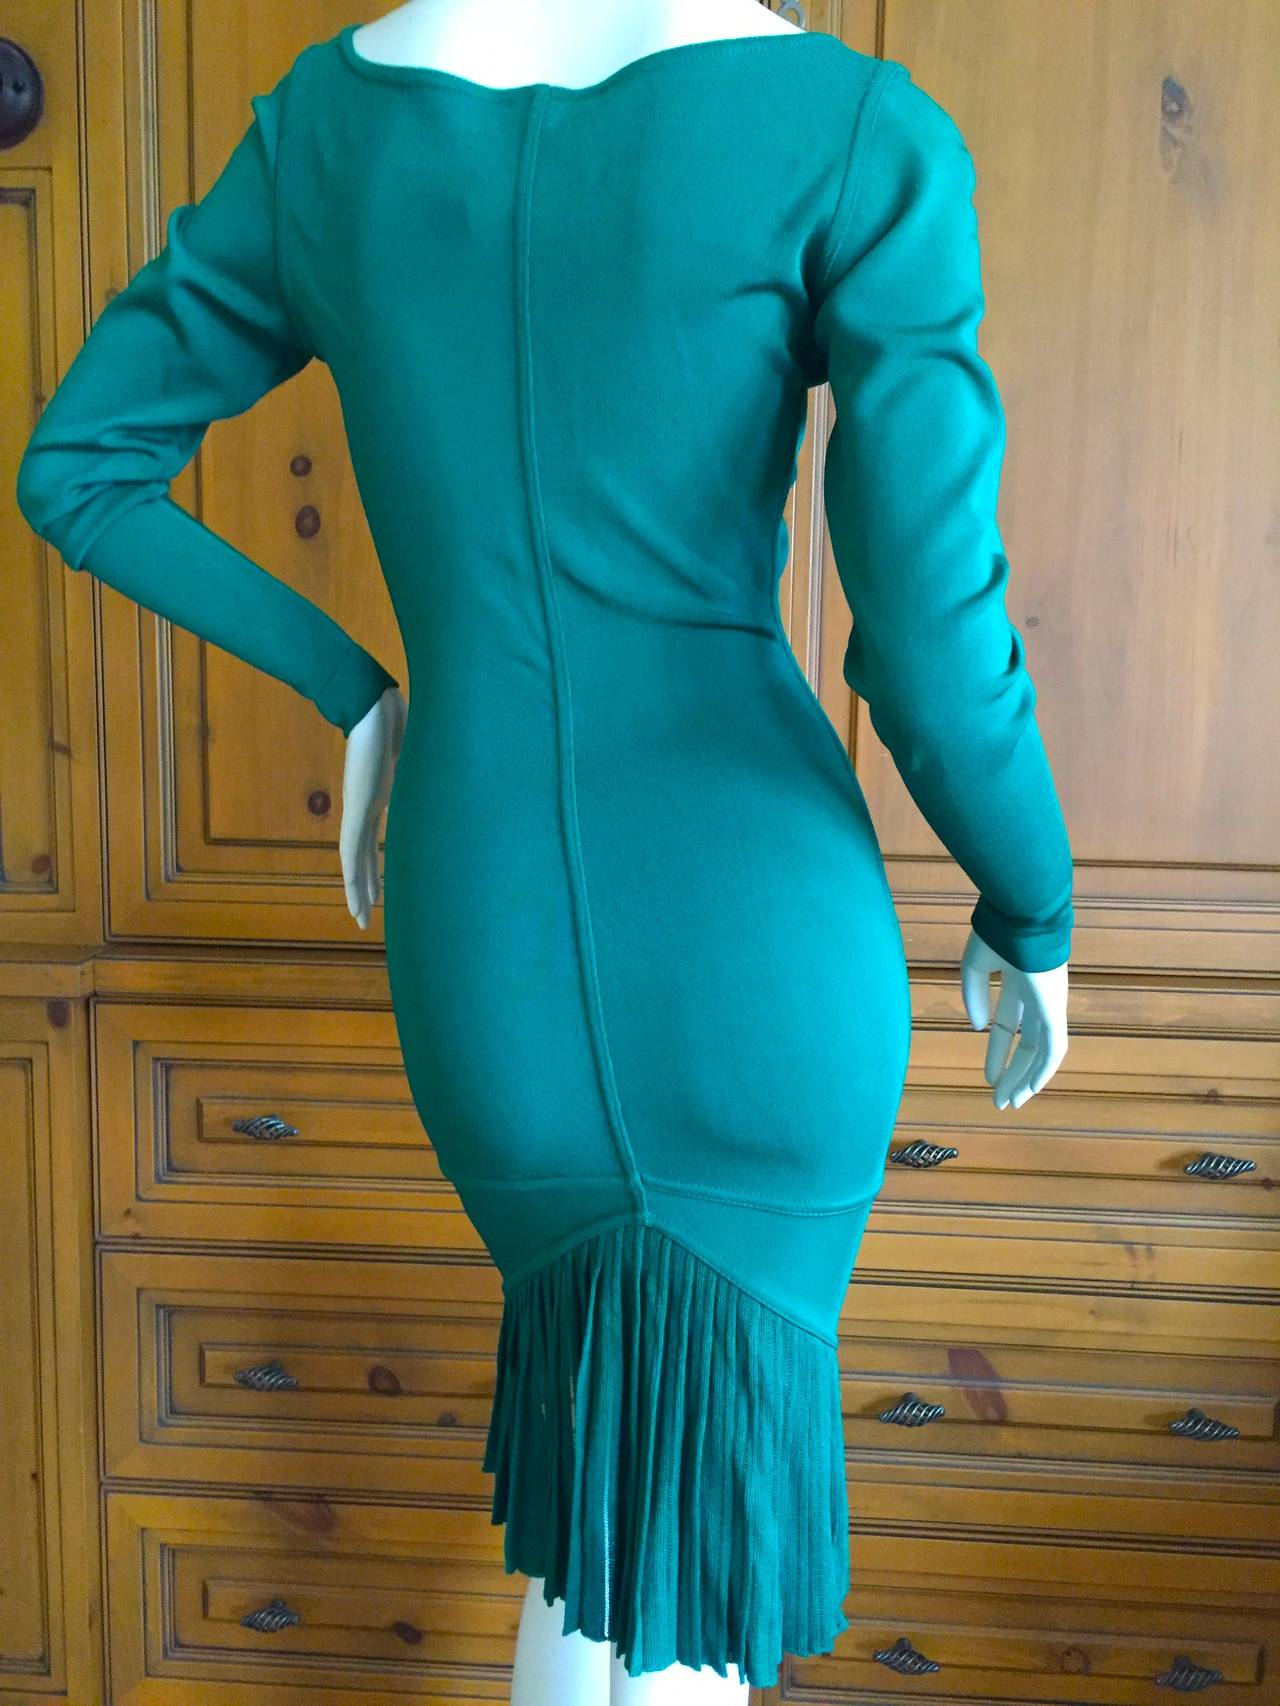 Sexy green dress with a fishtail back from Azzedine Alaia circa 1990.

Appx Size L
There is a lot of stretch in this dress
Bust 36